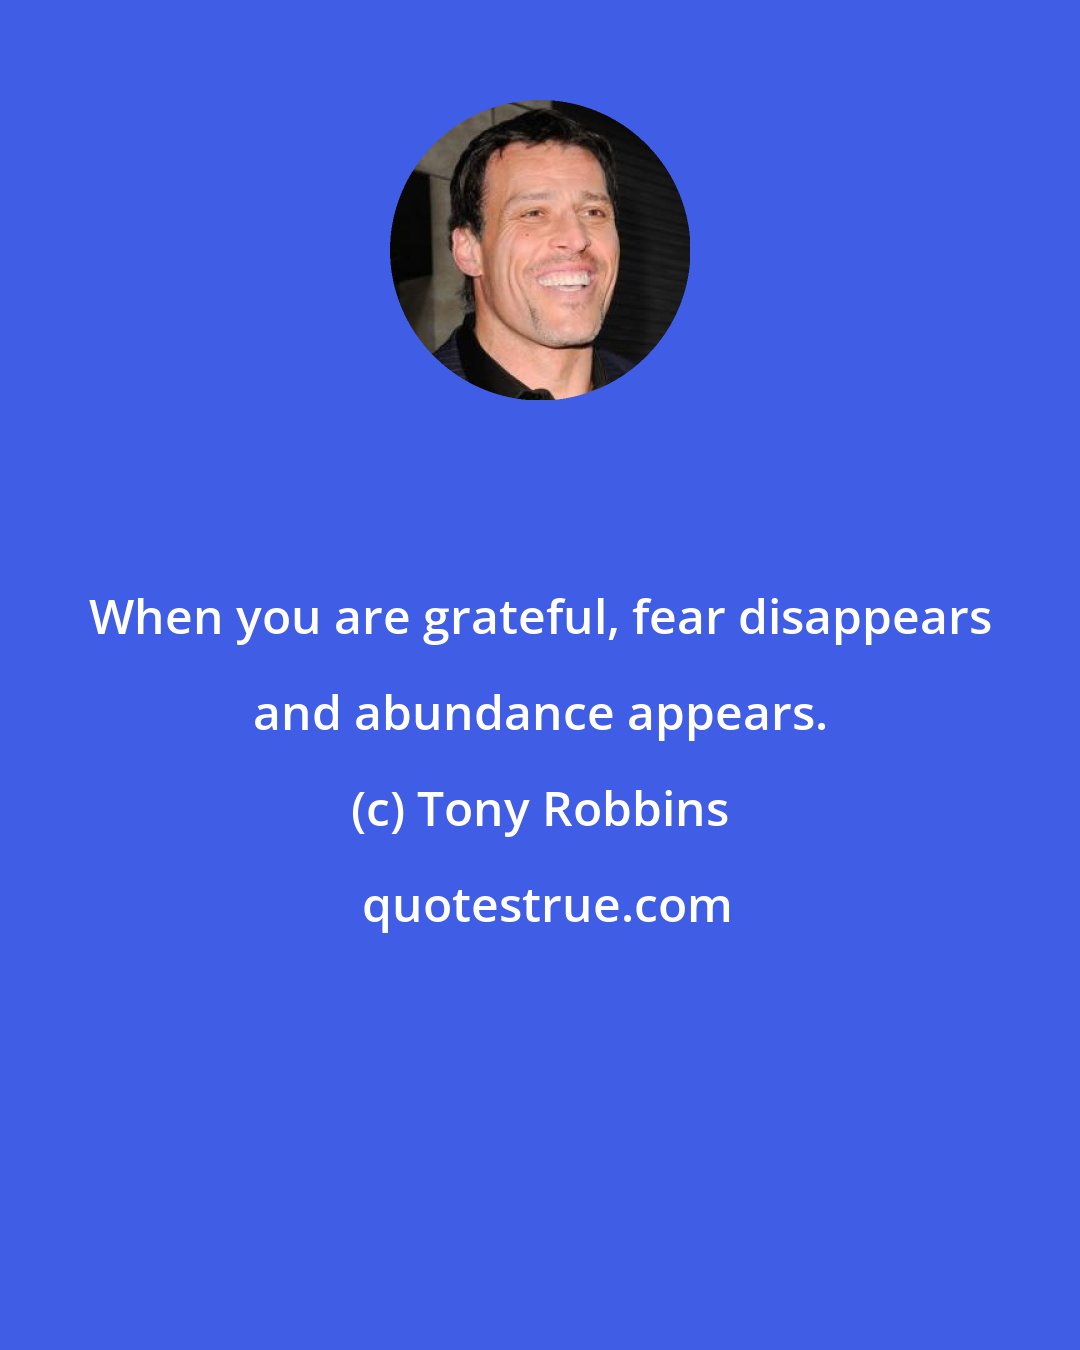 Tony Robbins: When you are grateful, fear disappears and abundance appears.